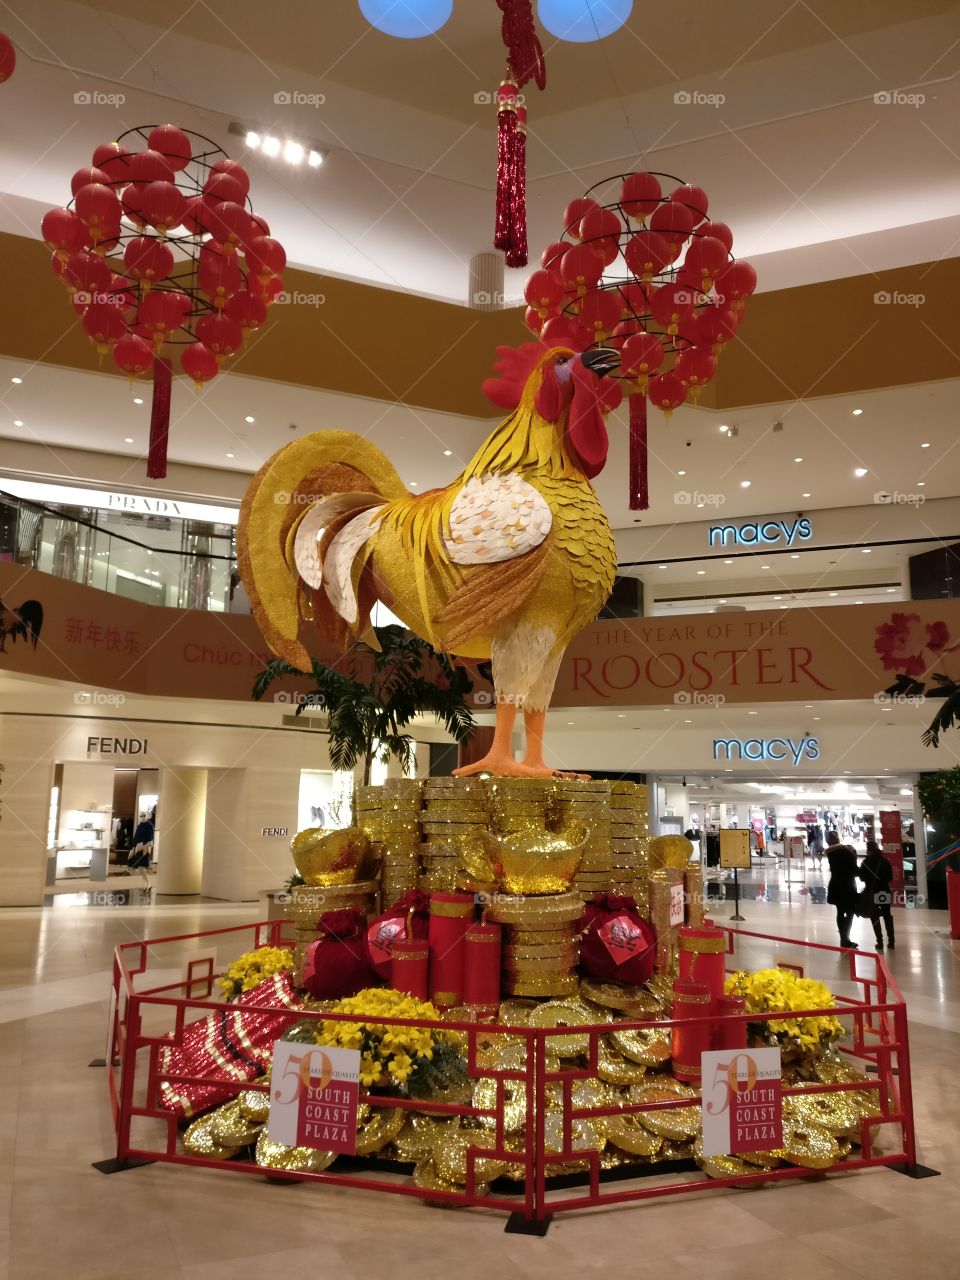 South coast plaza rooster